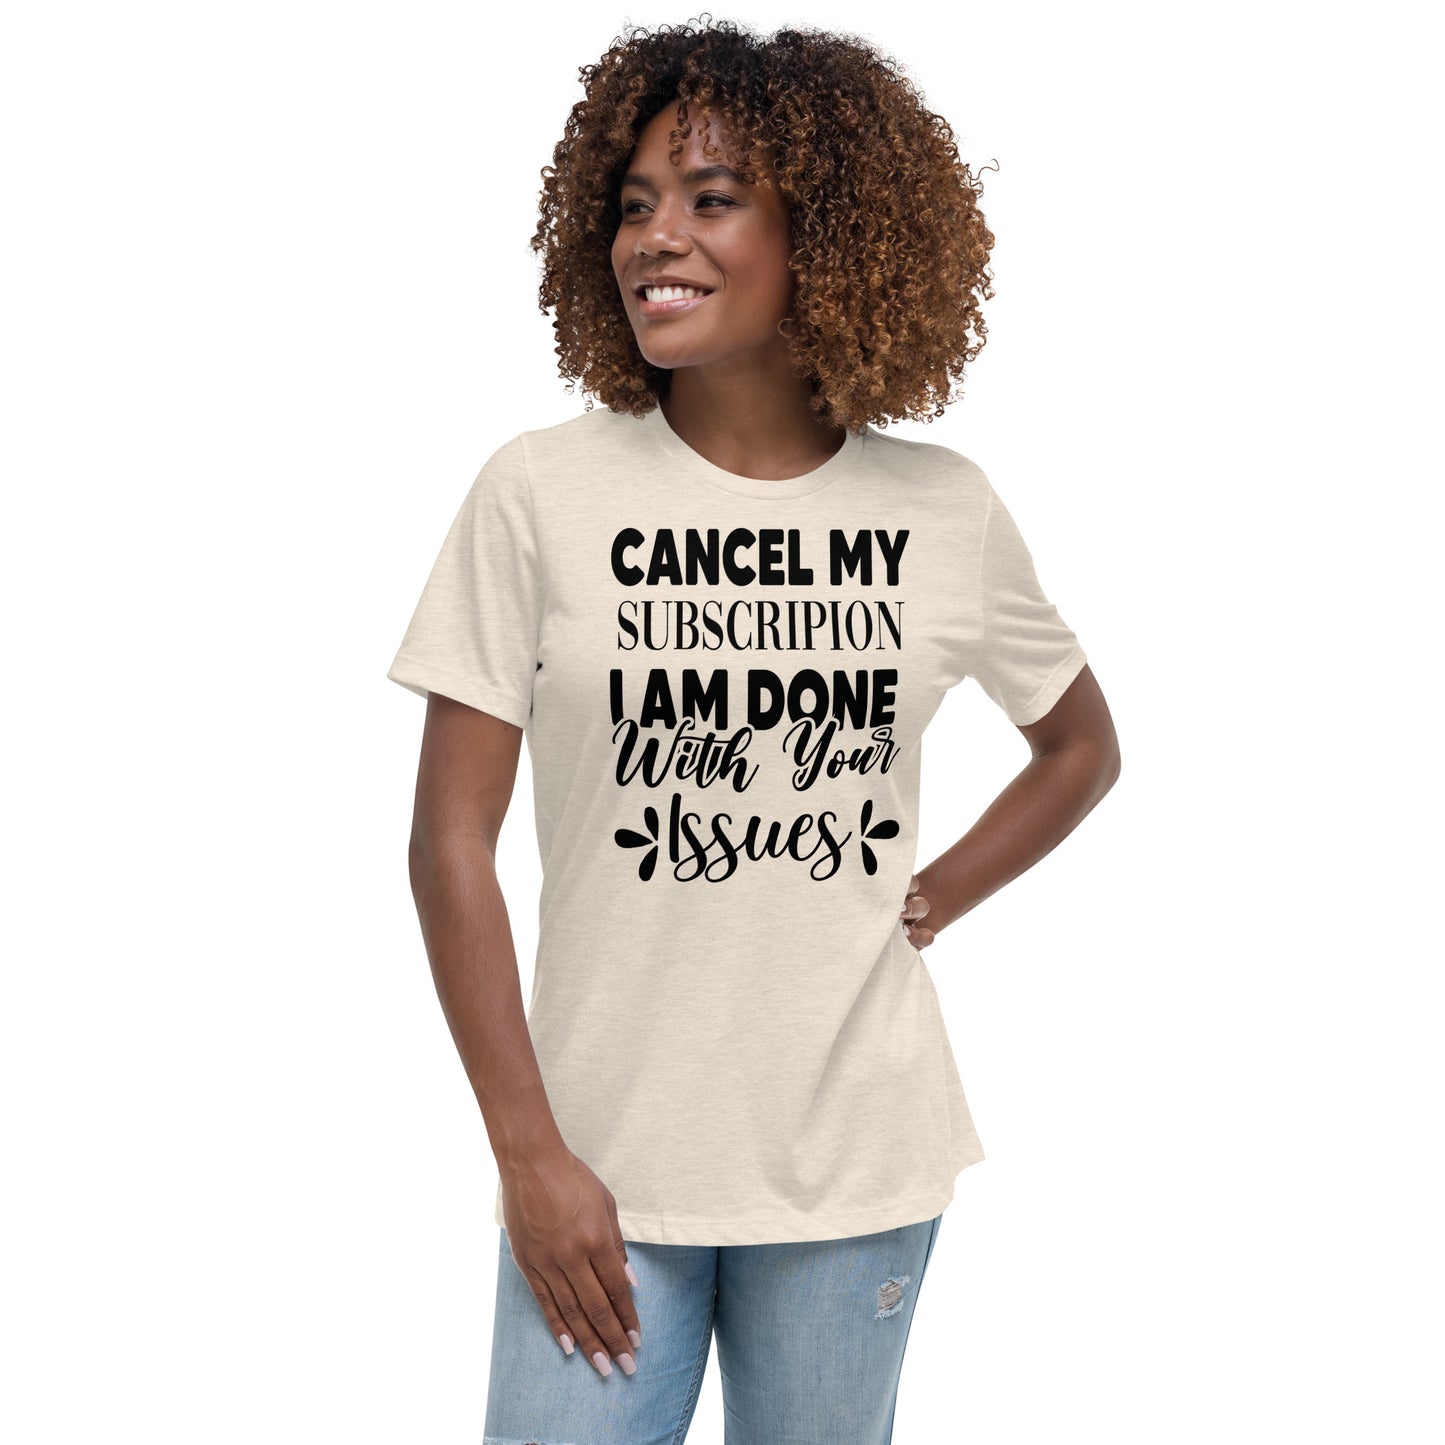 Cancel My Subscription I Am Done With Your Issues Unisex Tshirt